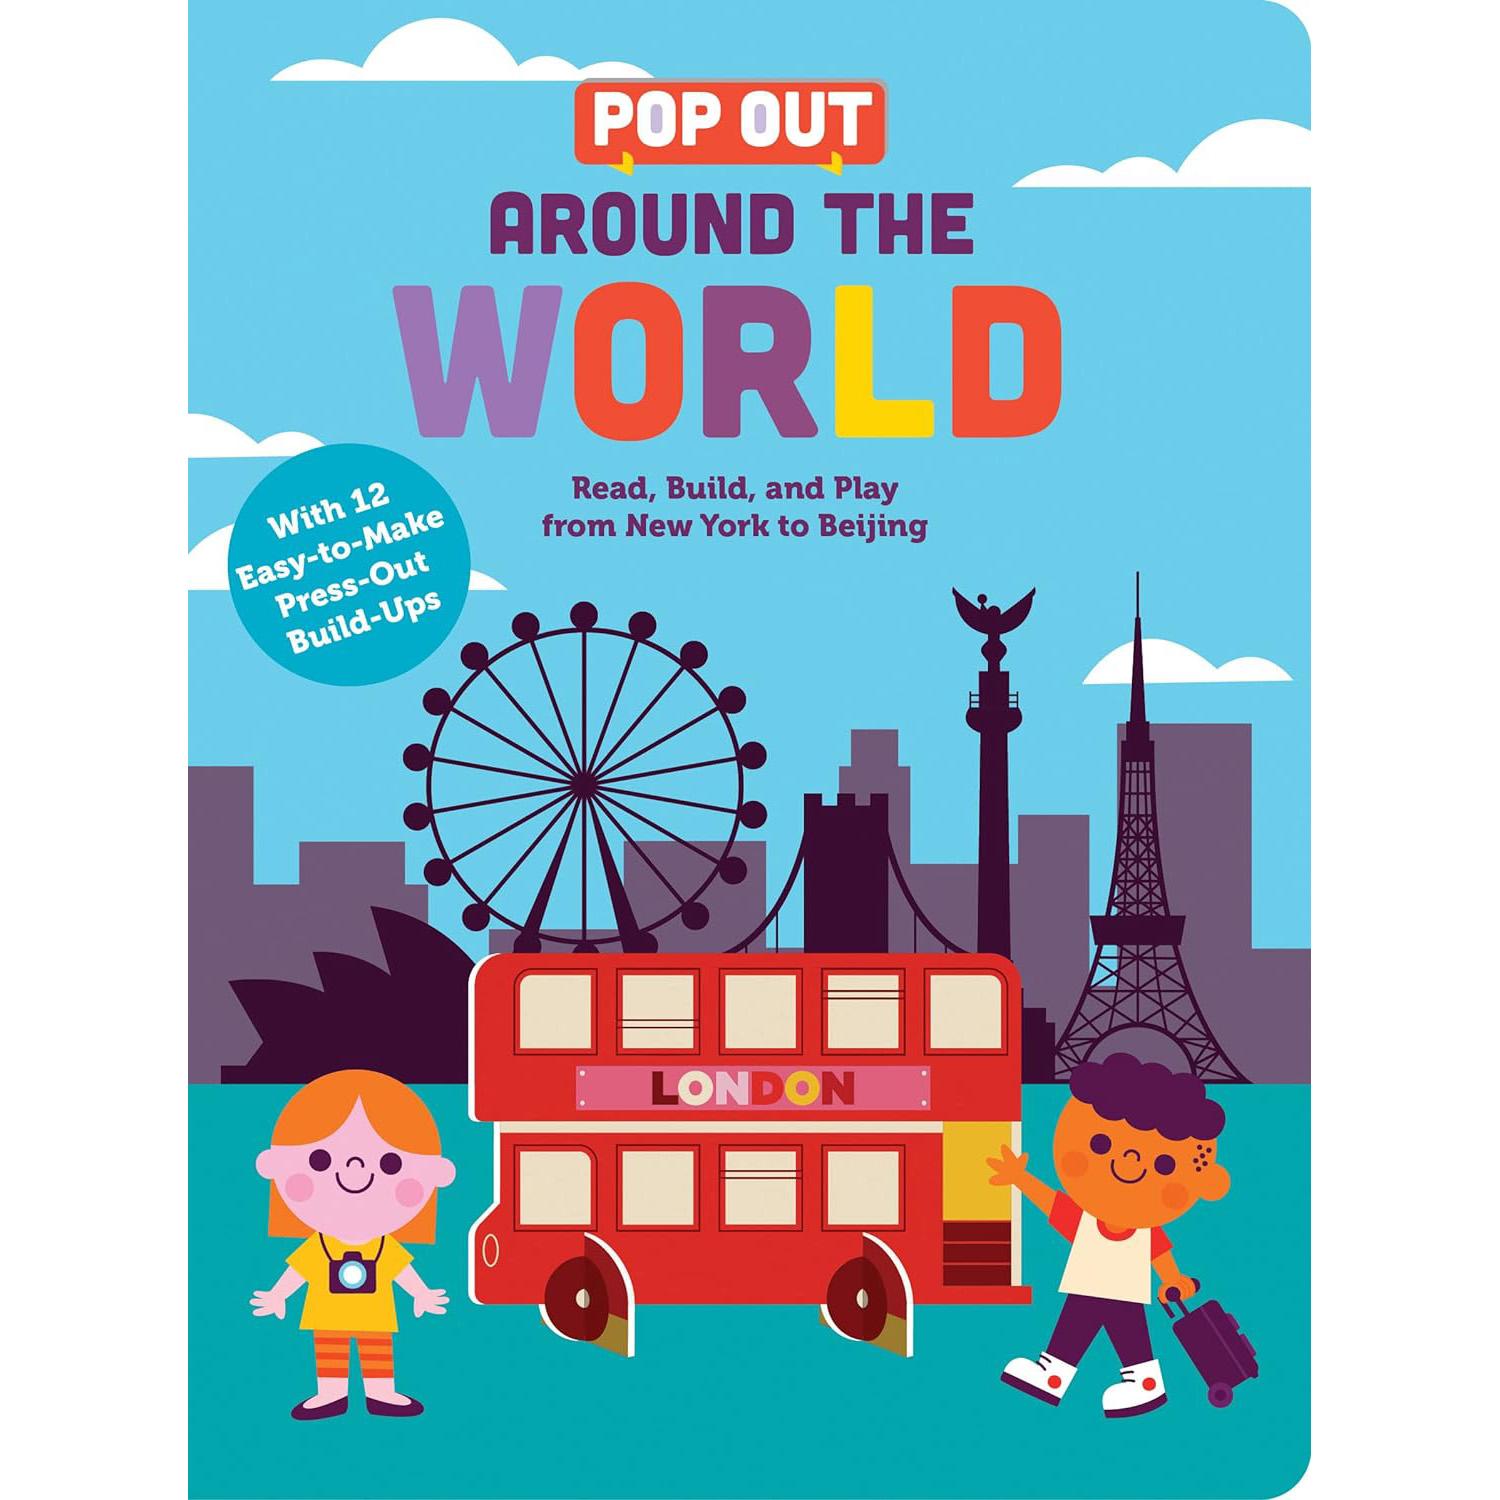 Pop Out Around the World Read Build Play from NY to Beijing Book for $2.03